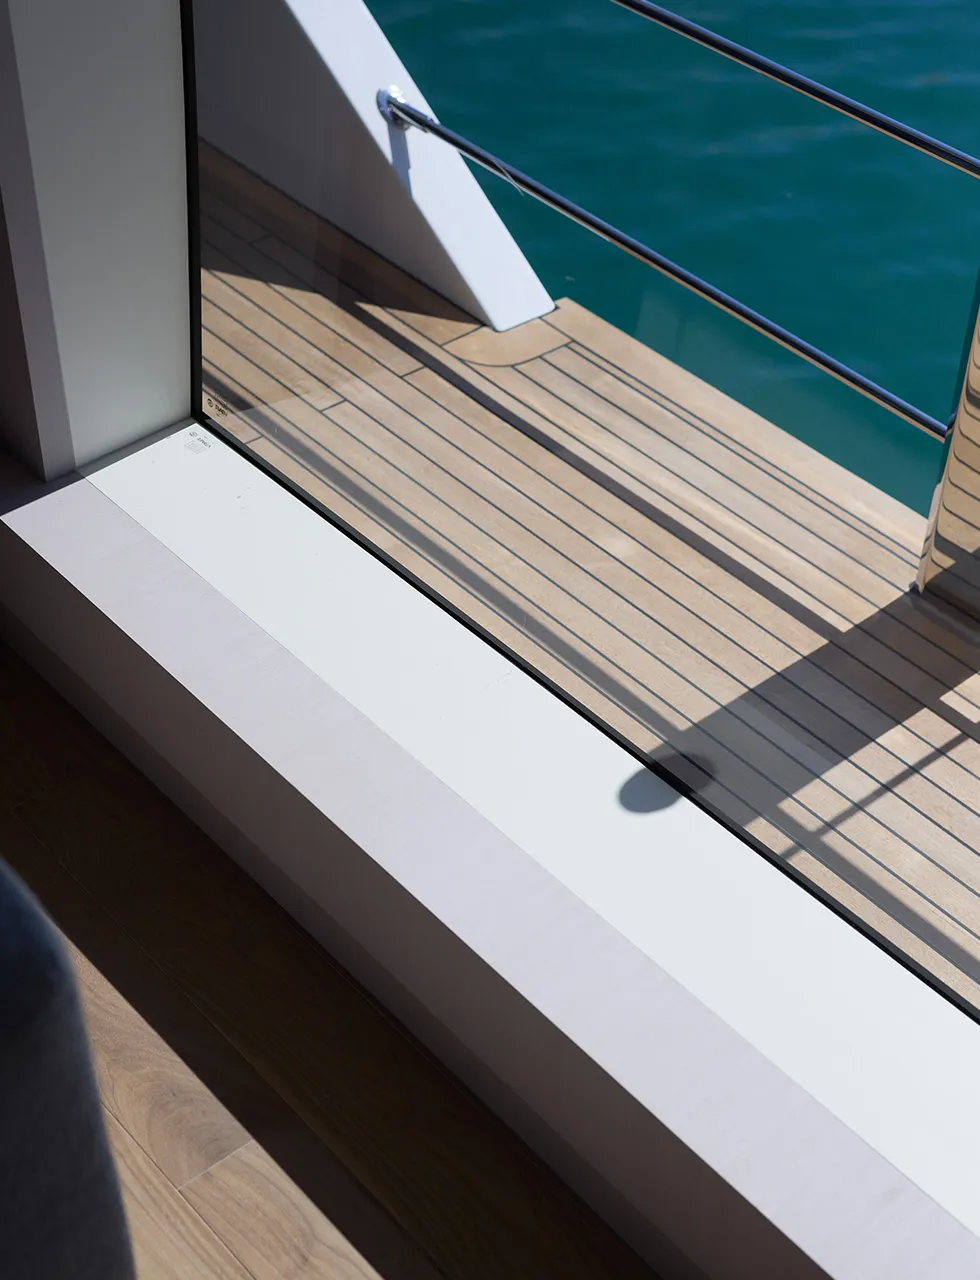 A close up shot of the teak decks onboard the superyacht Custom Line 106 take from inside the yacht